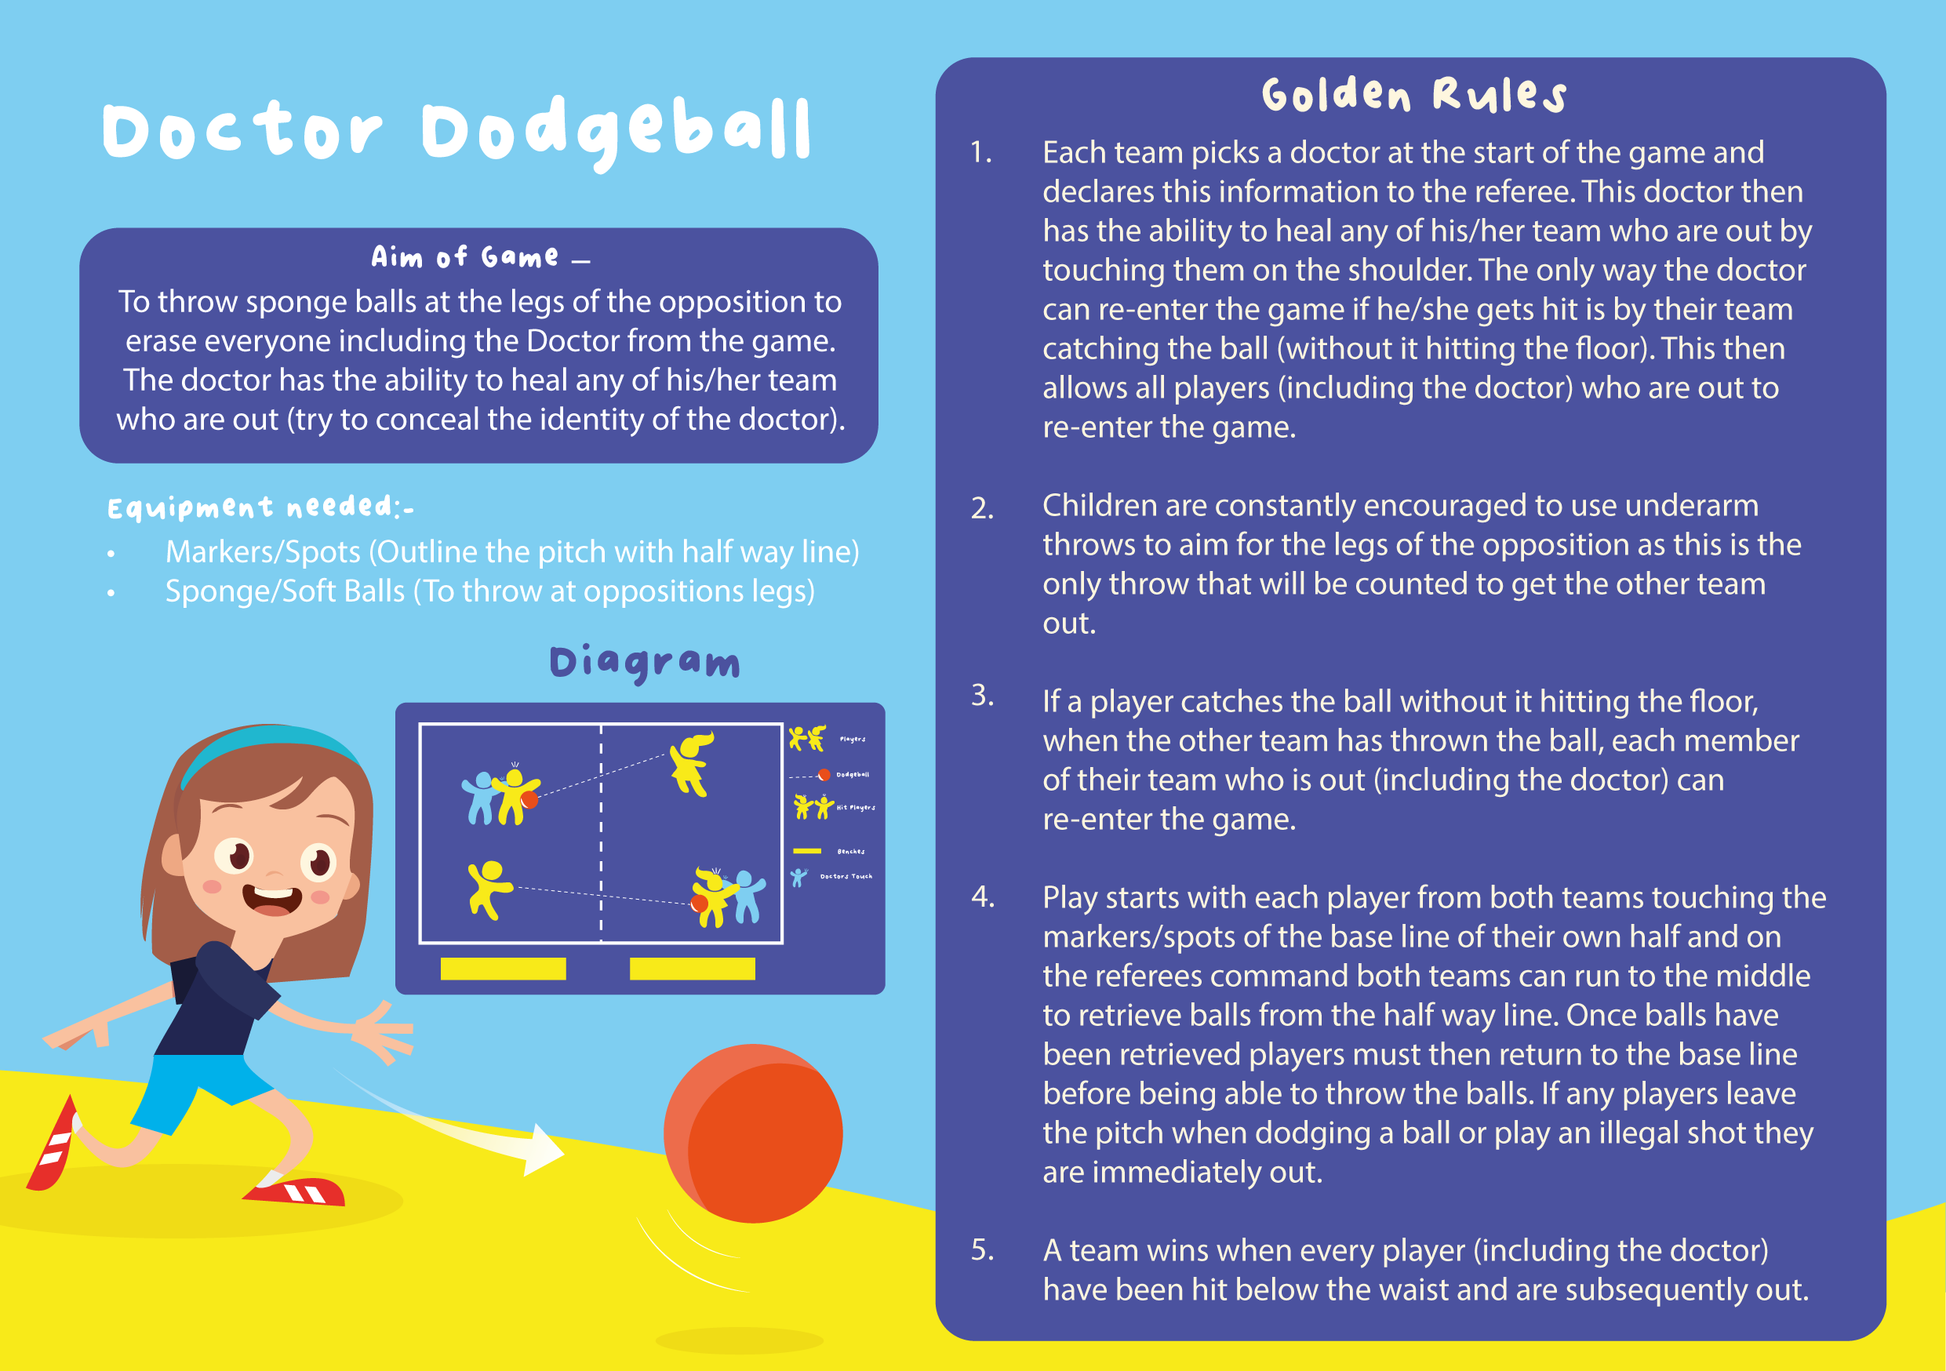 Doctor dodgeball game rules for children aged 4 - 11 years old